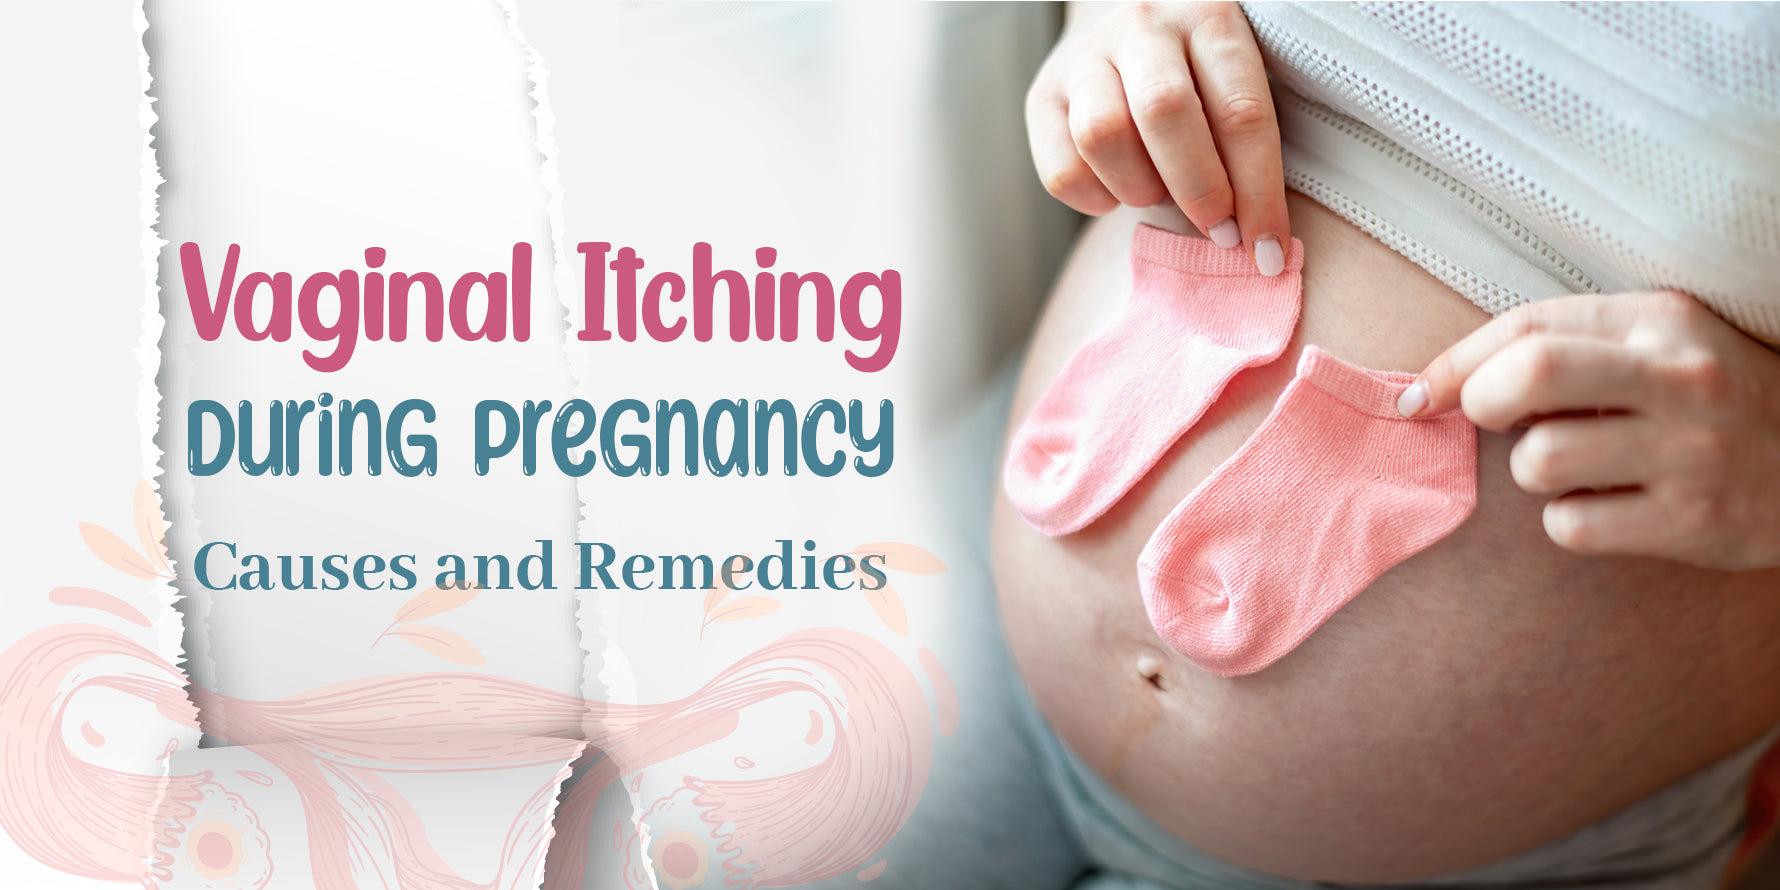 Vaginal Itching During Pregnancy: Causes and Remedies